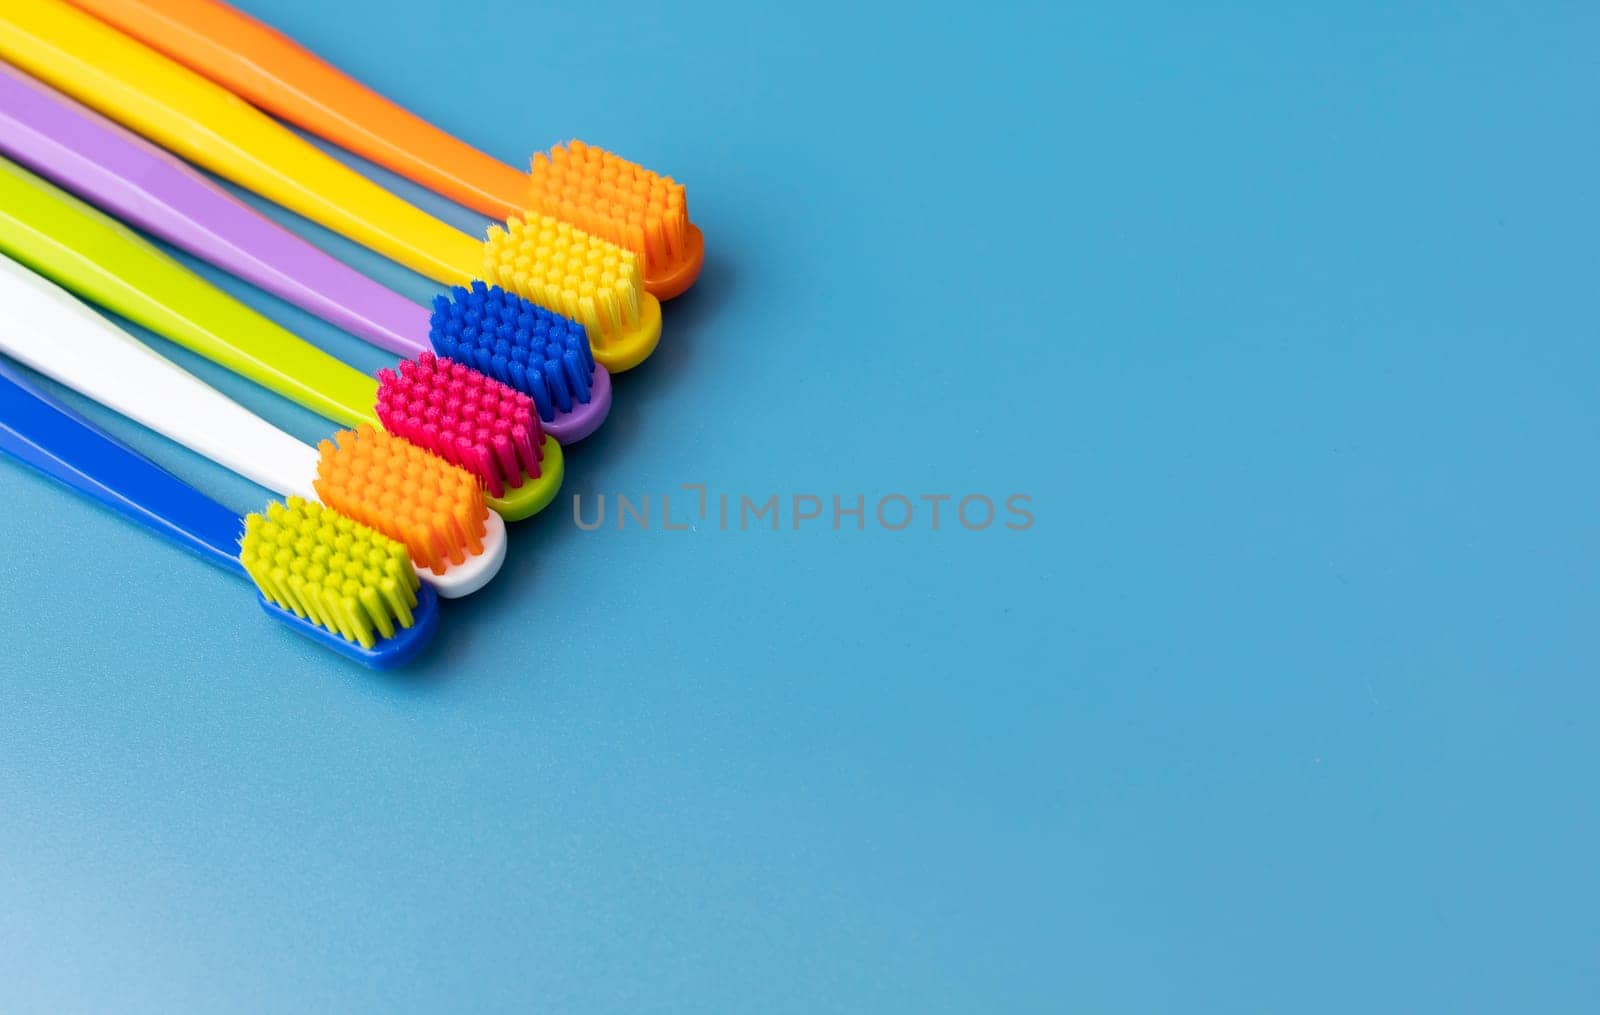 Design Set of Colorful Antibacterial Toothbrushes on Blue Background. View From Above. Copy Space For Text. Set for Dental Hygiene, Bathing Self Care Products. Horizontal Plane by netatsi